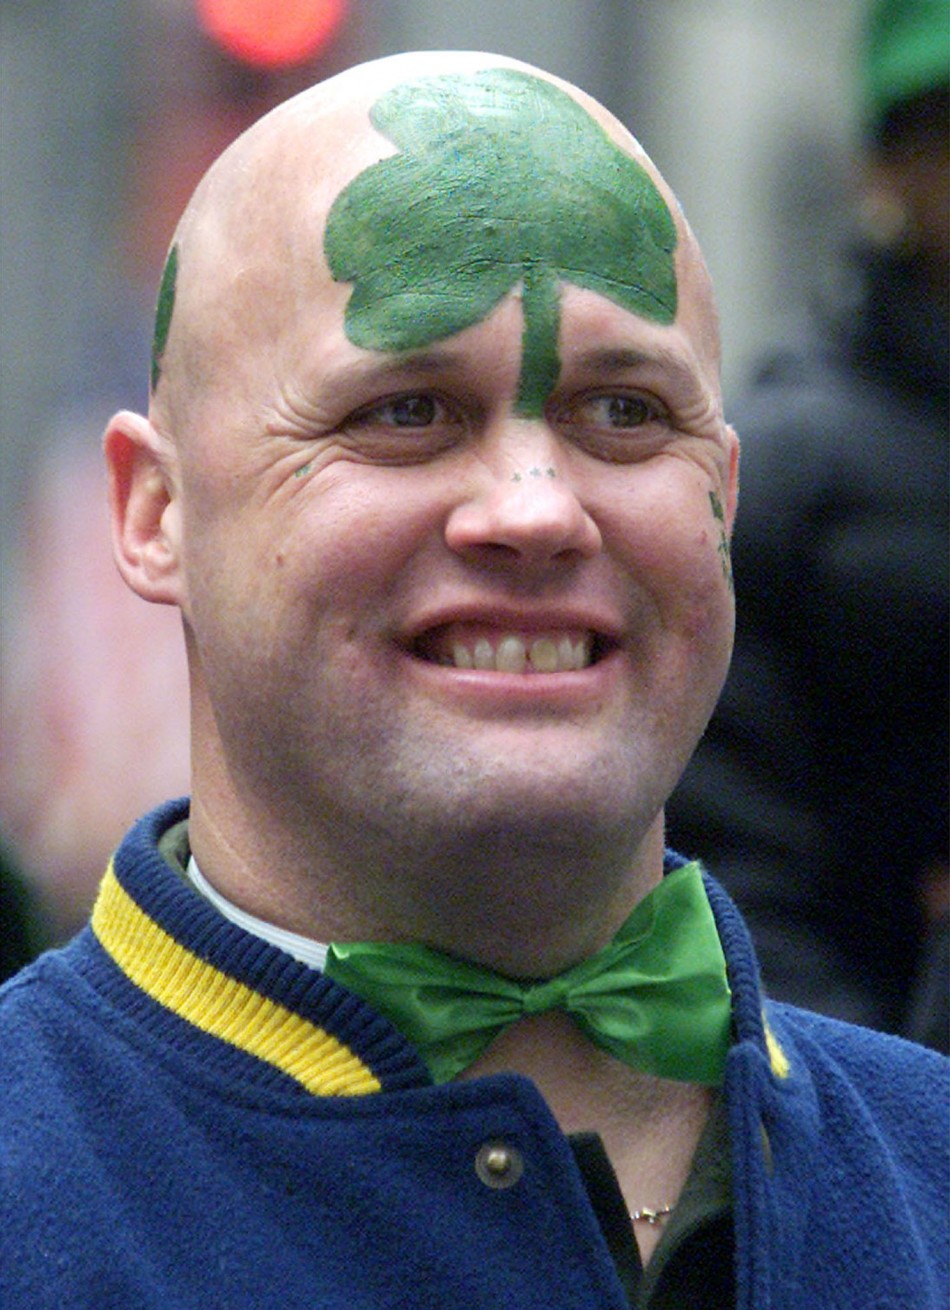 MAN WITH PAINTED HEAD WATCHES SAINT PATRICKS DAY PARADE IN NEW YORK.